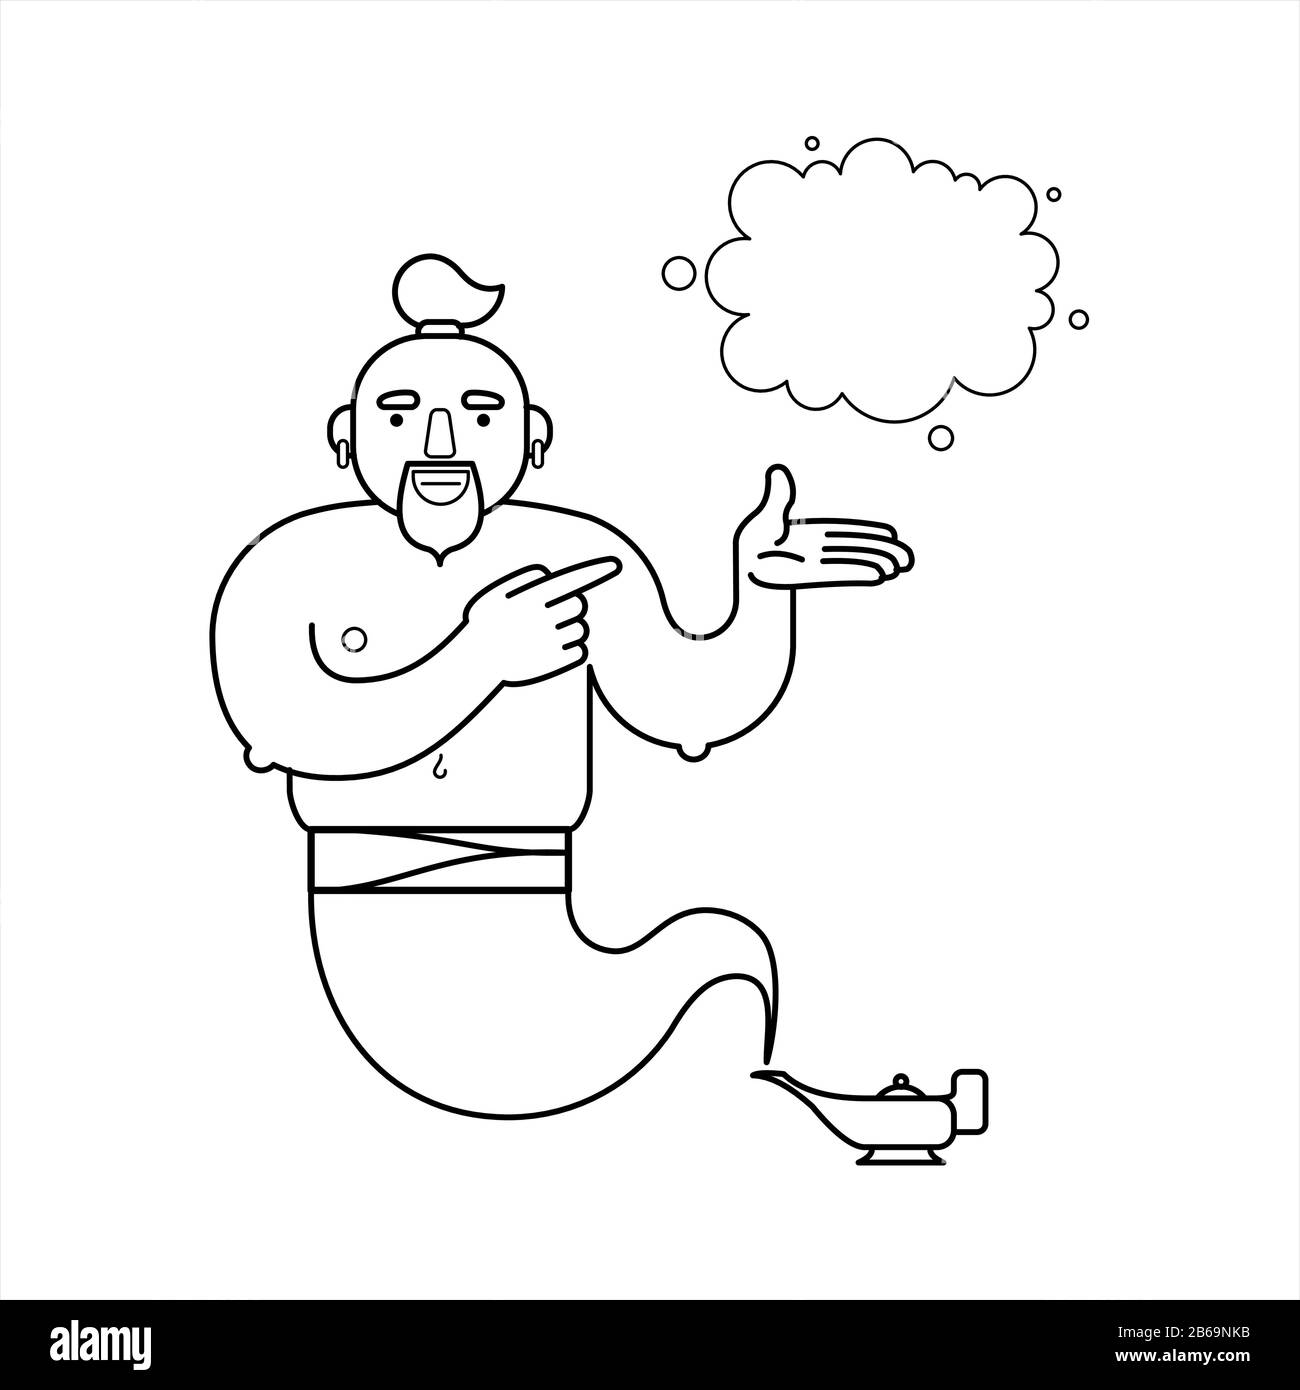 outline, contour genie from a lamp, cartoon character. For coloring book page. The genie will fulfill any three wishes. Draw a wish. Place for drawing Stock Vector